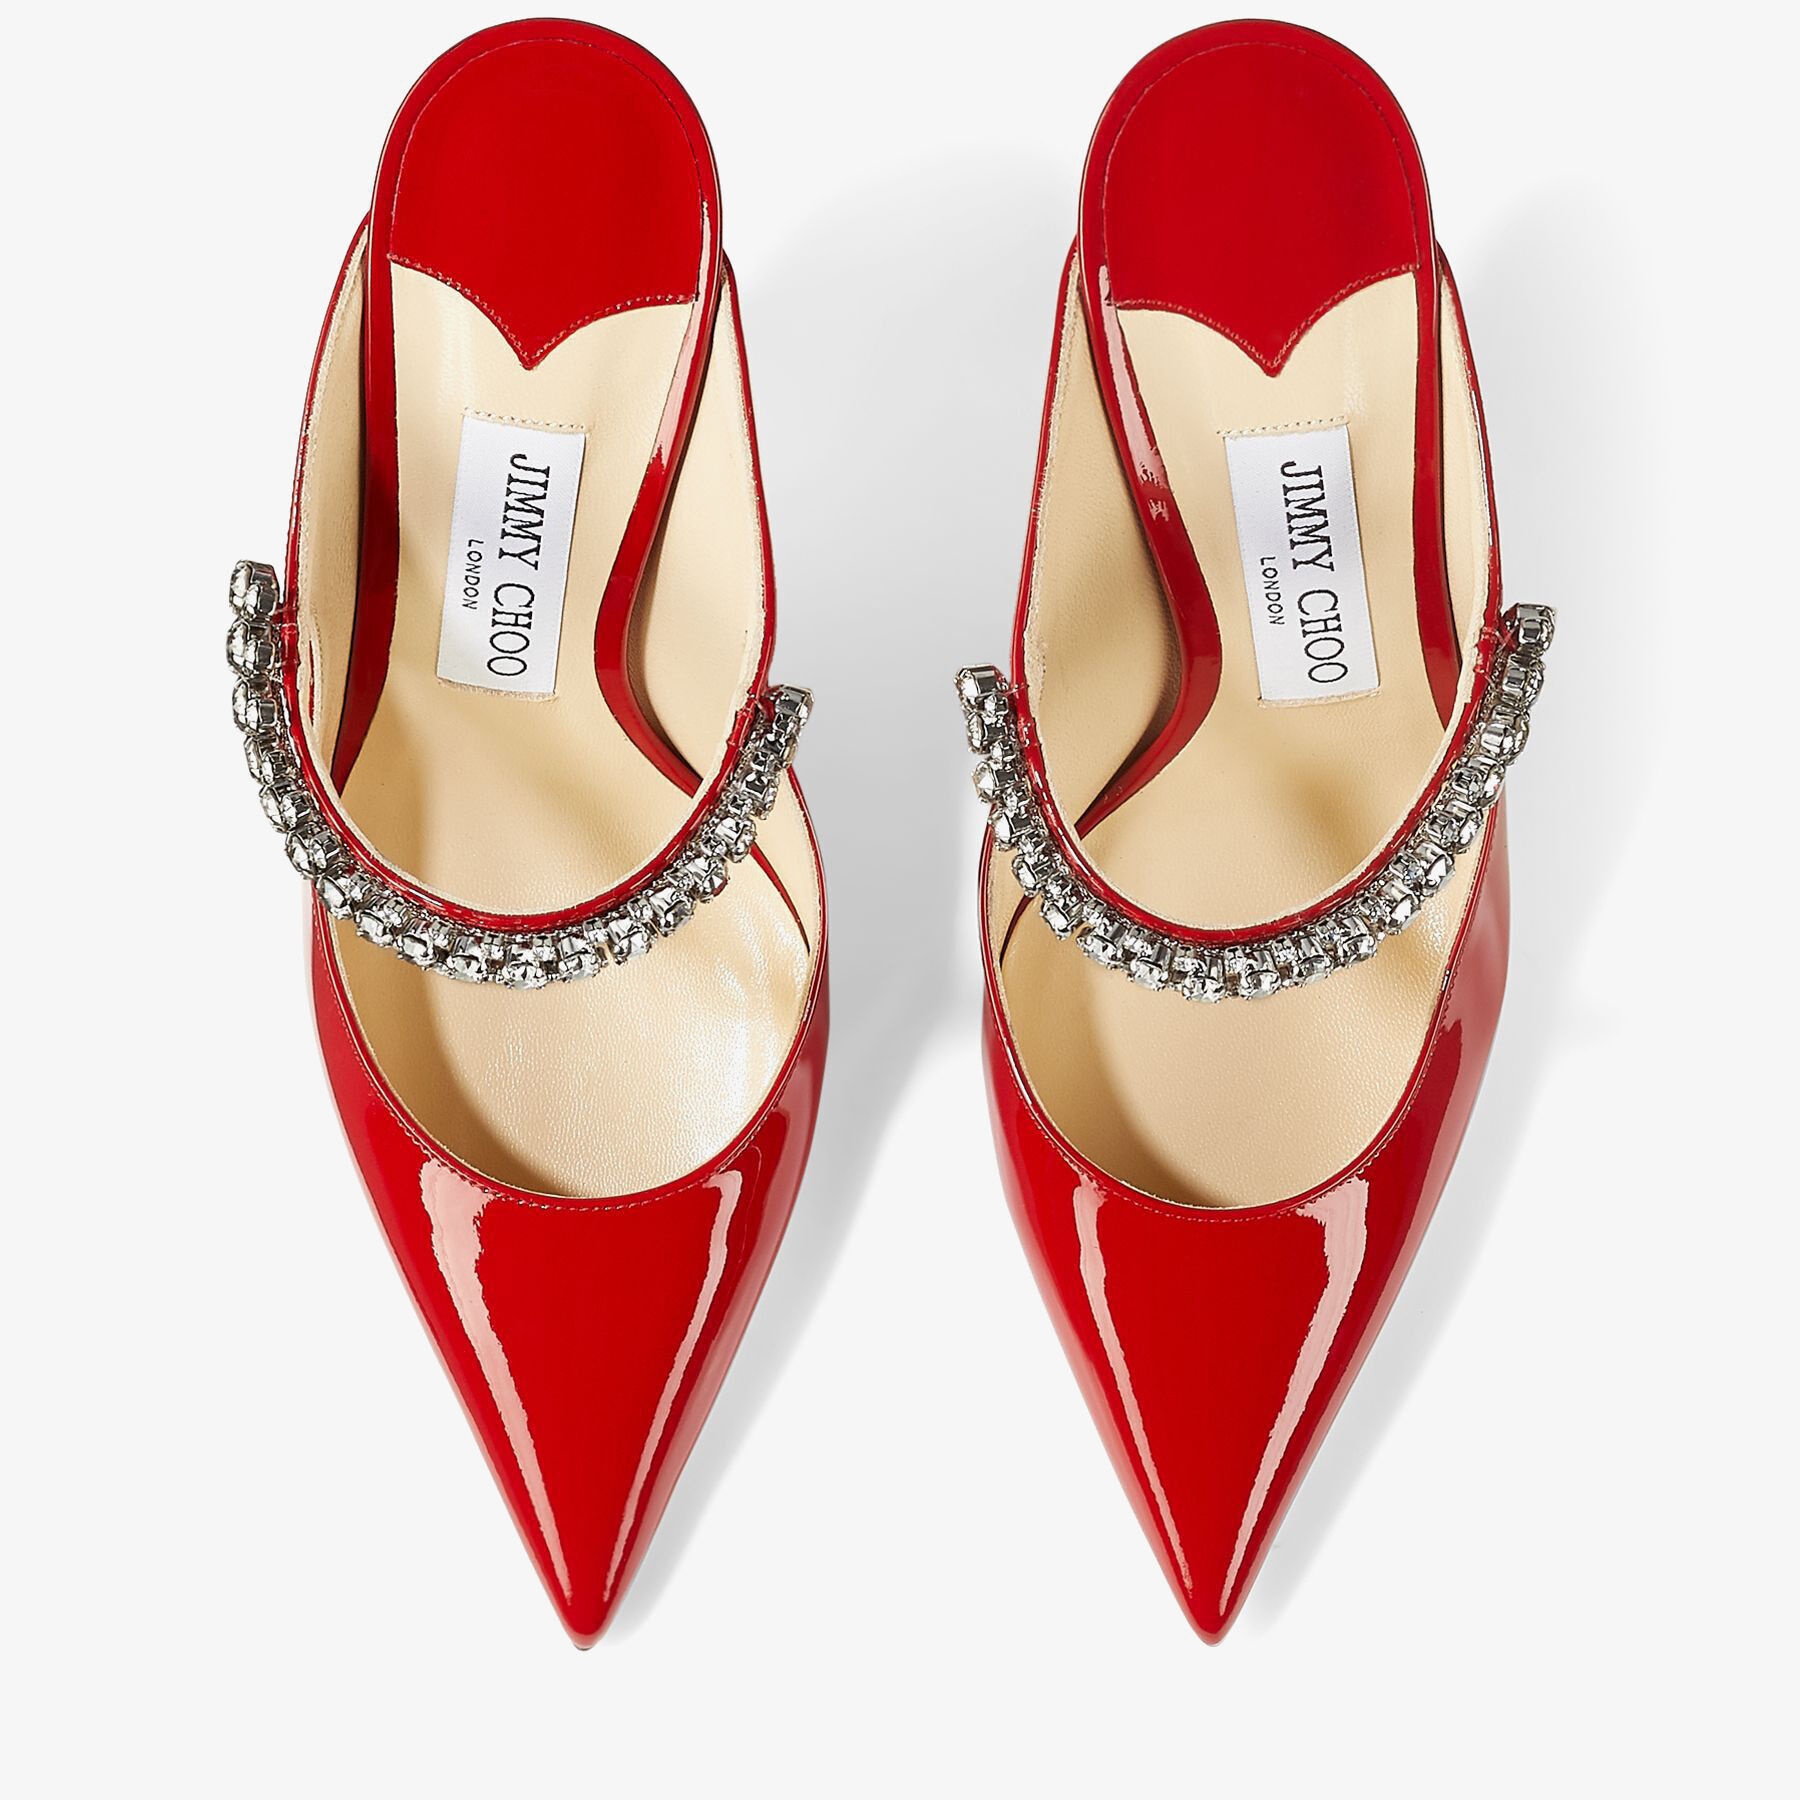 Bing 100
Red Patent Leather Mules with Crystal Strap - 5